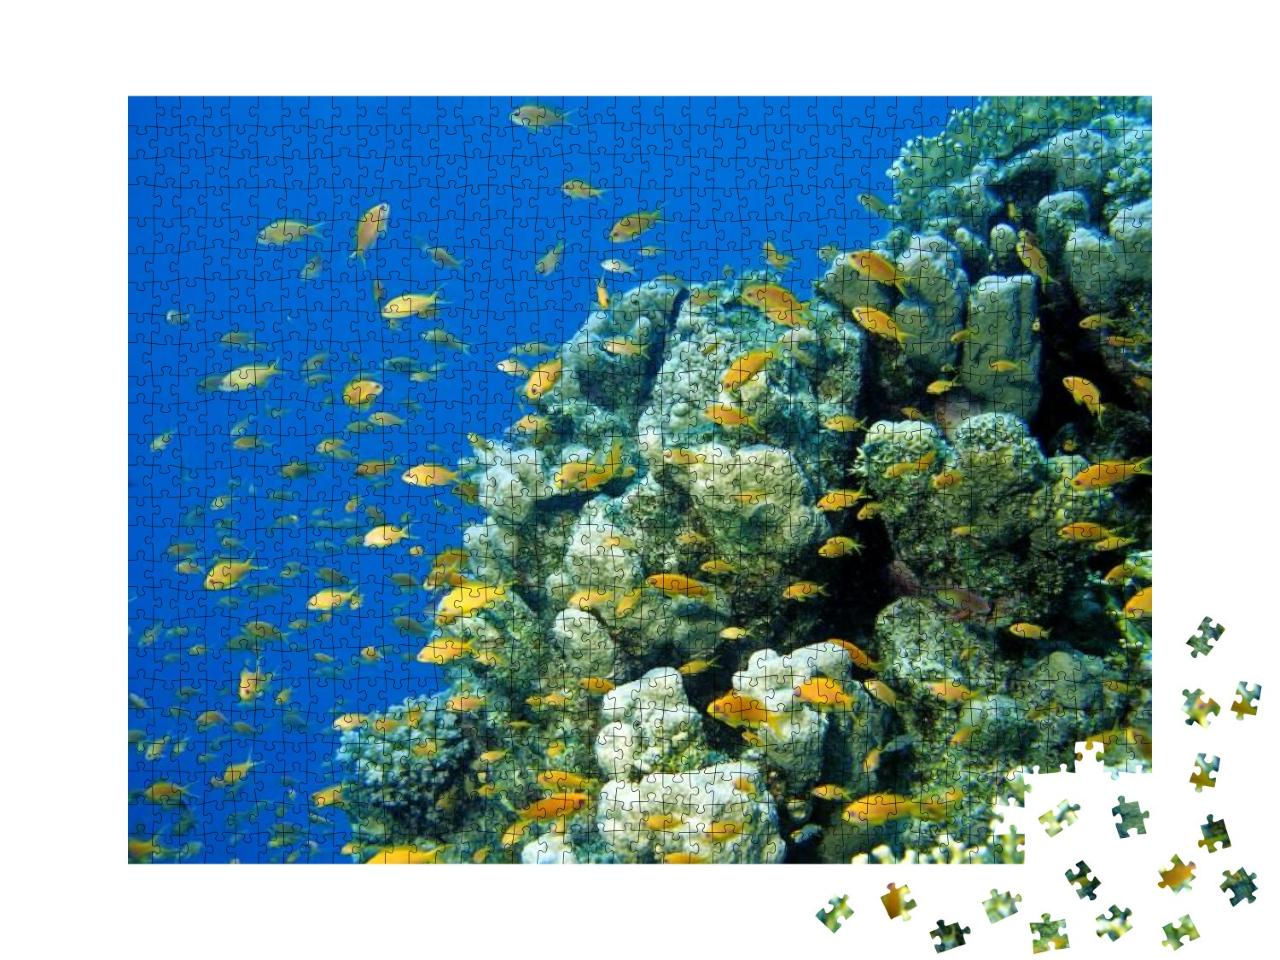 Anthias At Tropical Coral Reef, Red Sea, Egypt... Jigsaw Puzzle with 1000 pieces